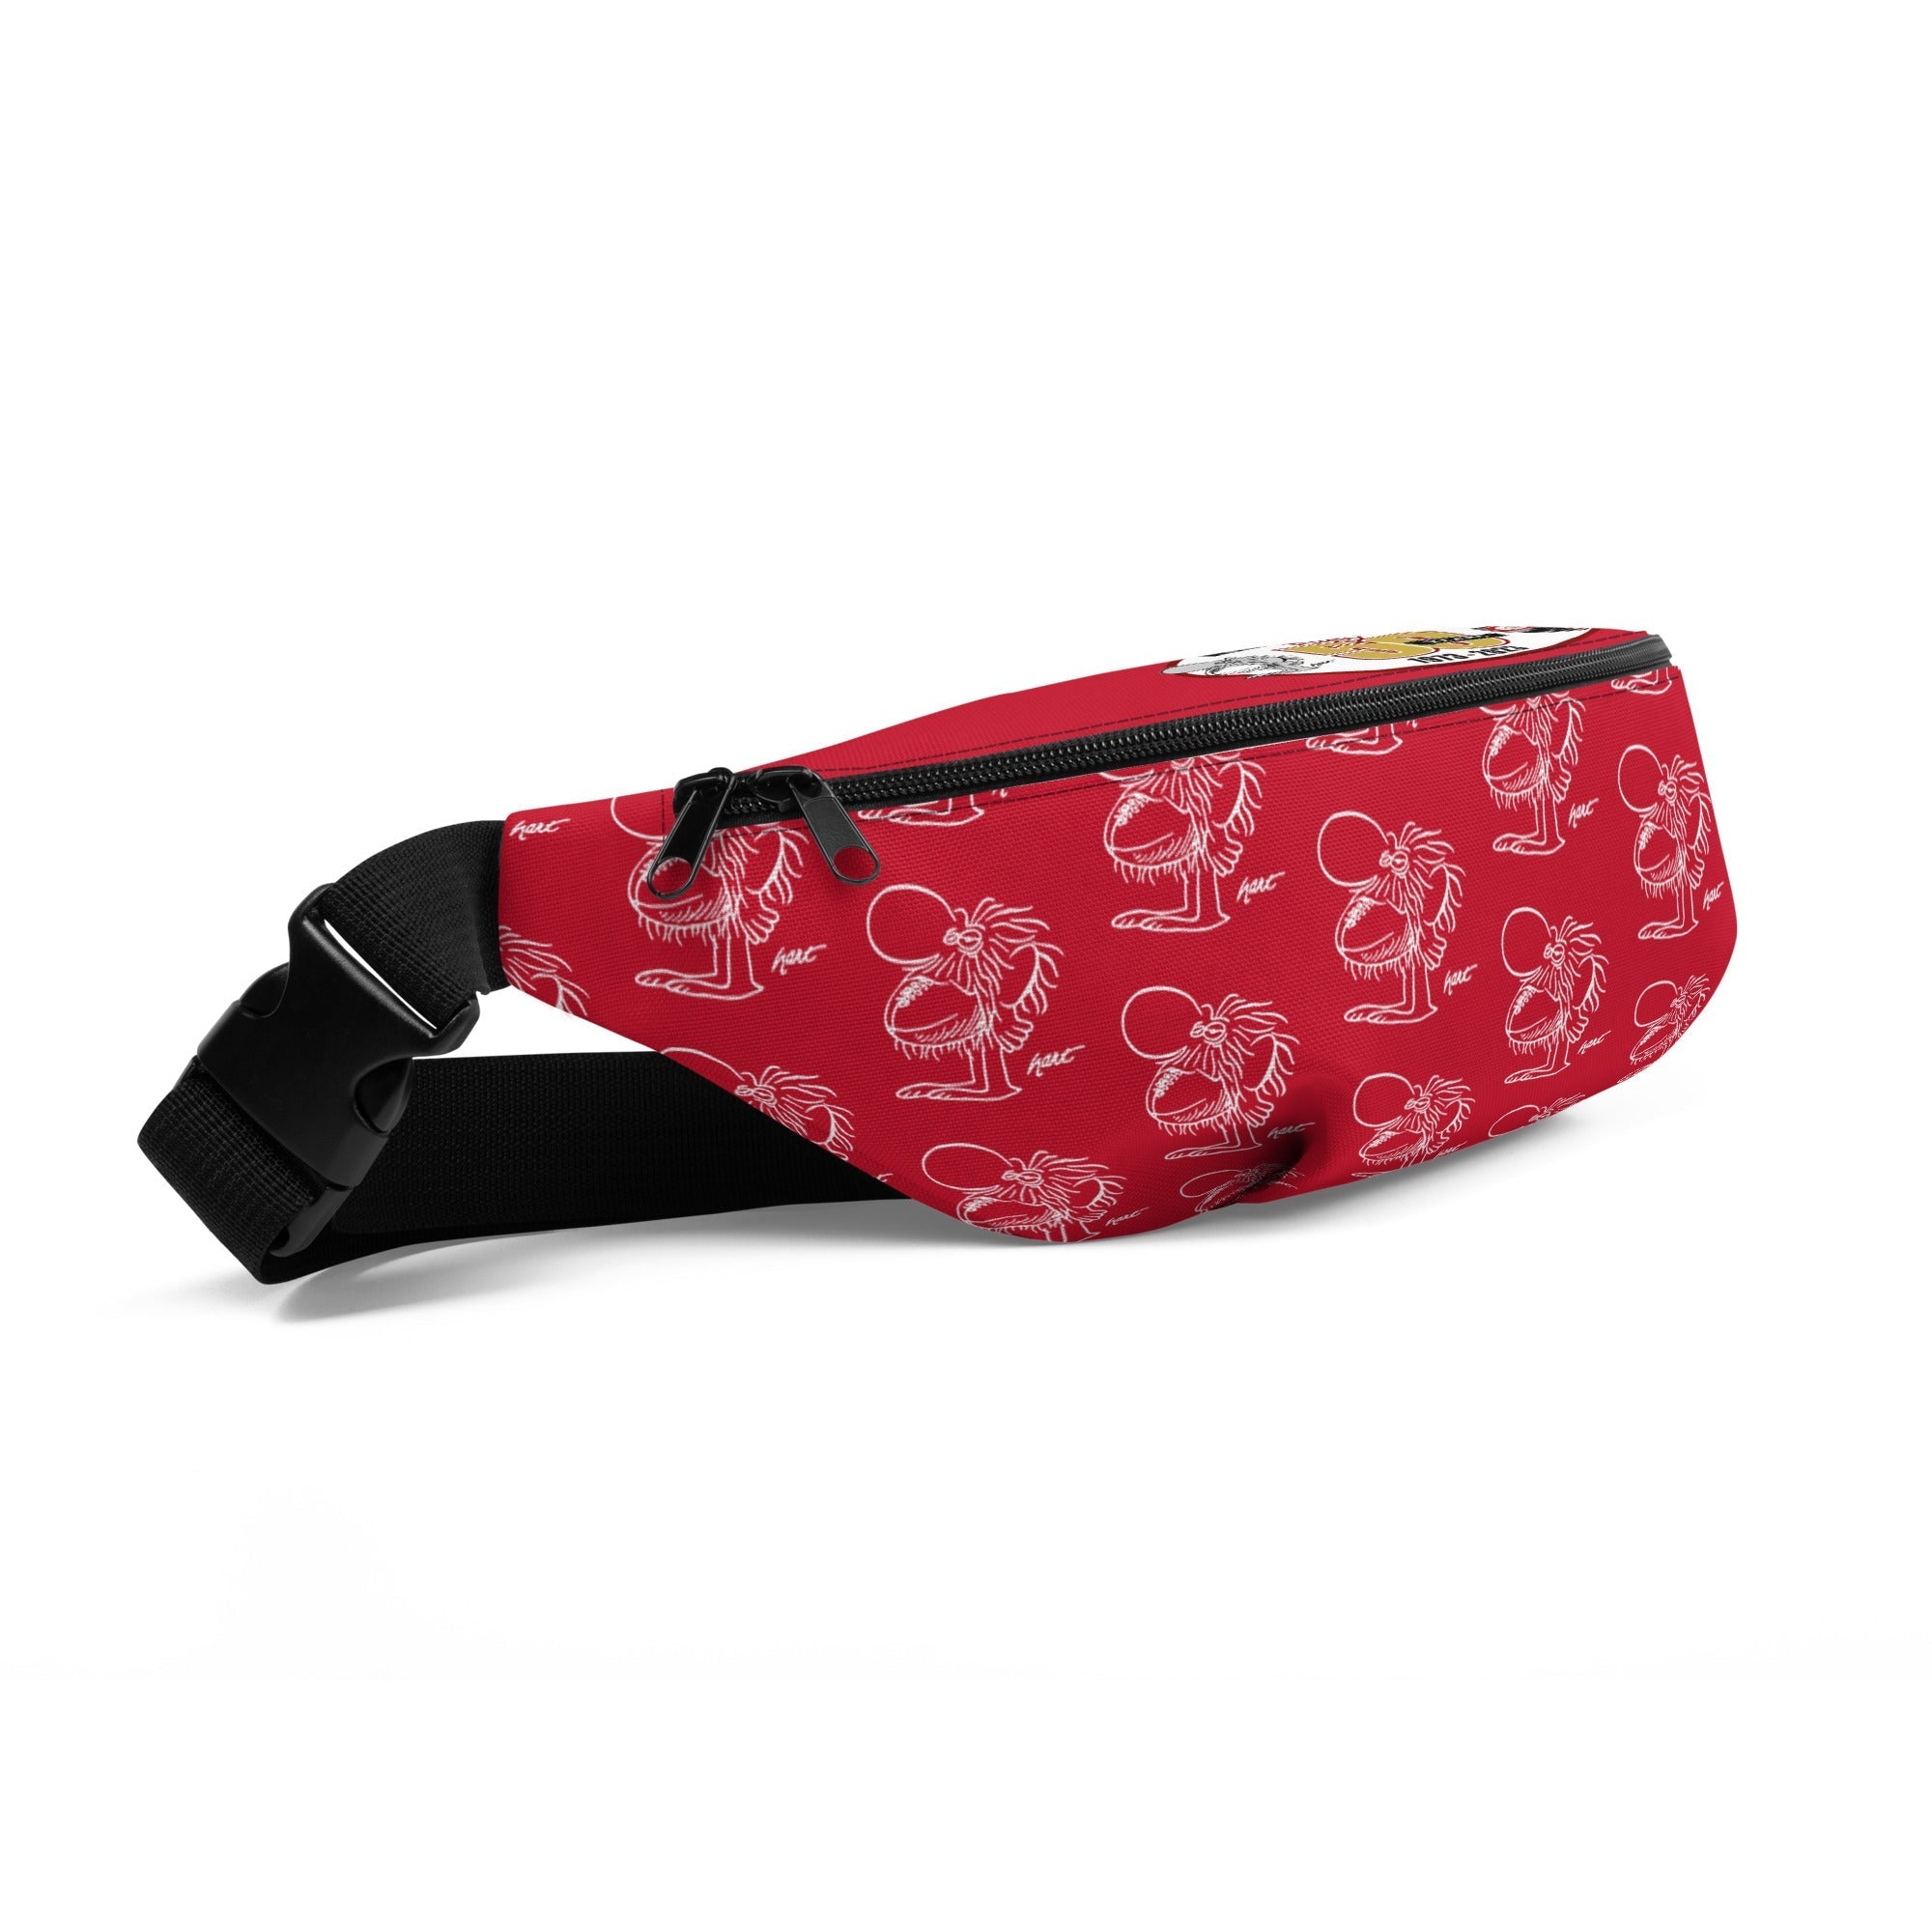 Rugby Imports Binghamton Barbarians Rugby Fanny Pack